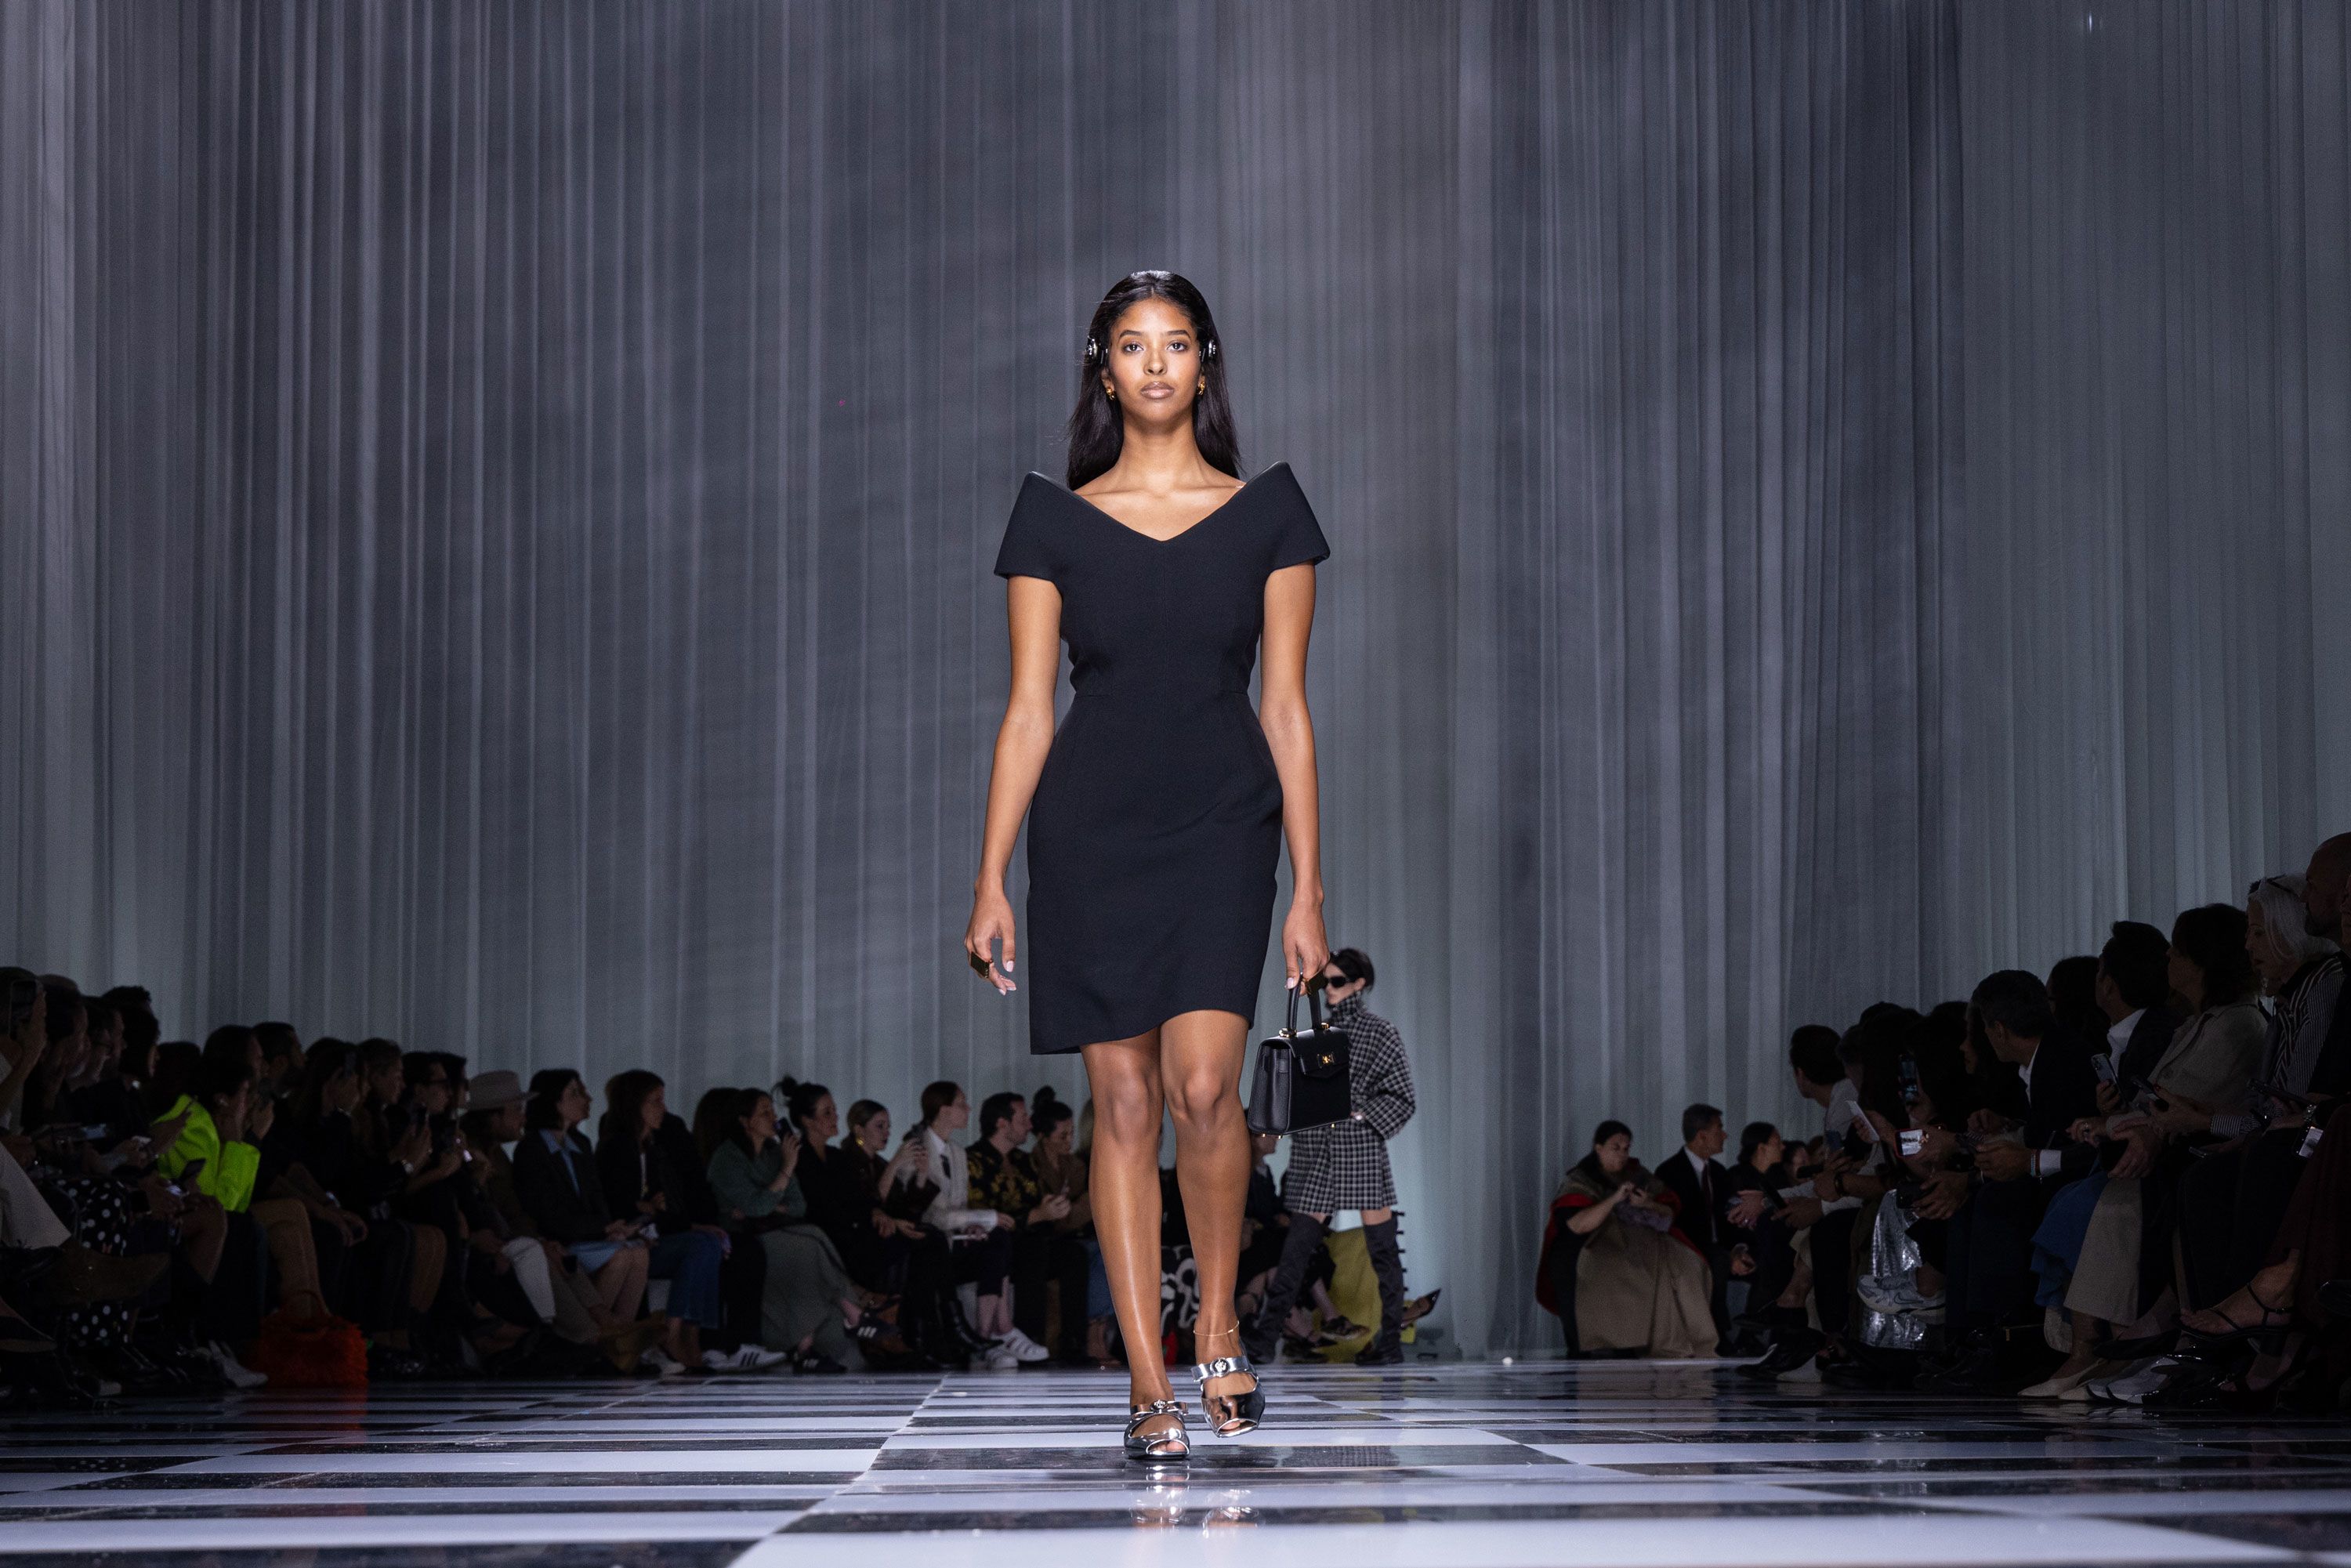 Vanessa Bryant cheers on her daughter's Fashion Week﻿ debut